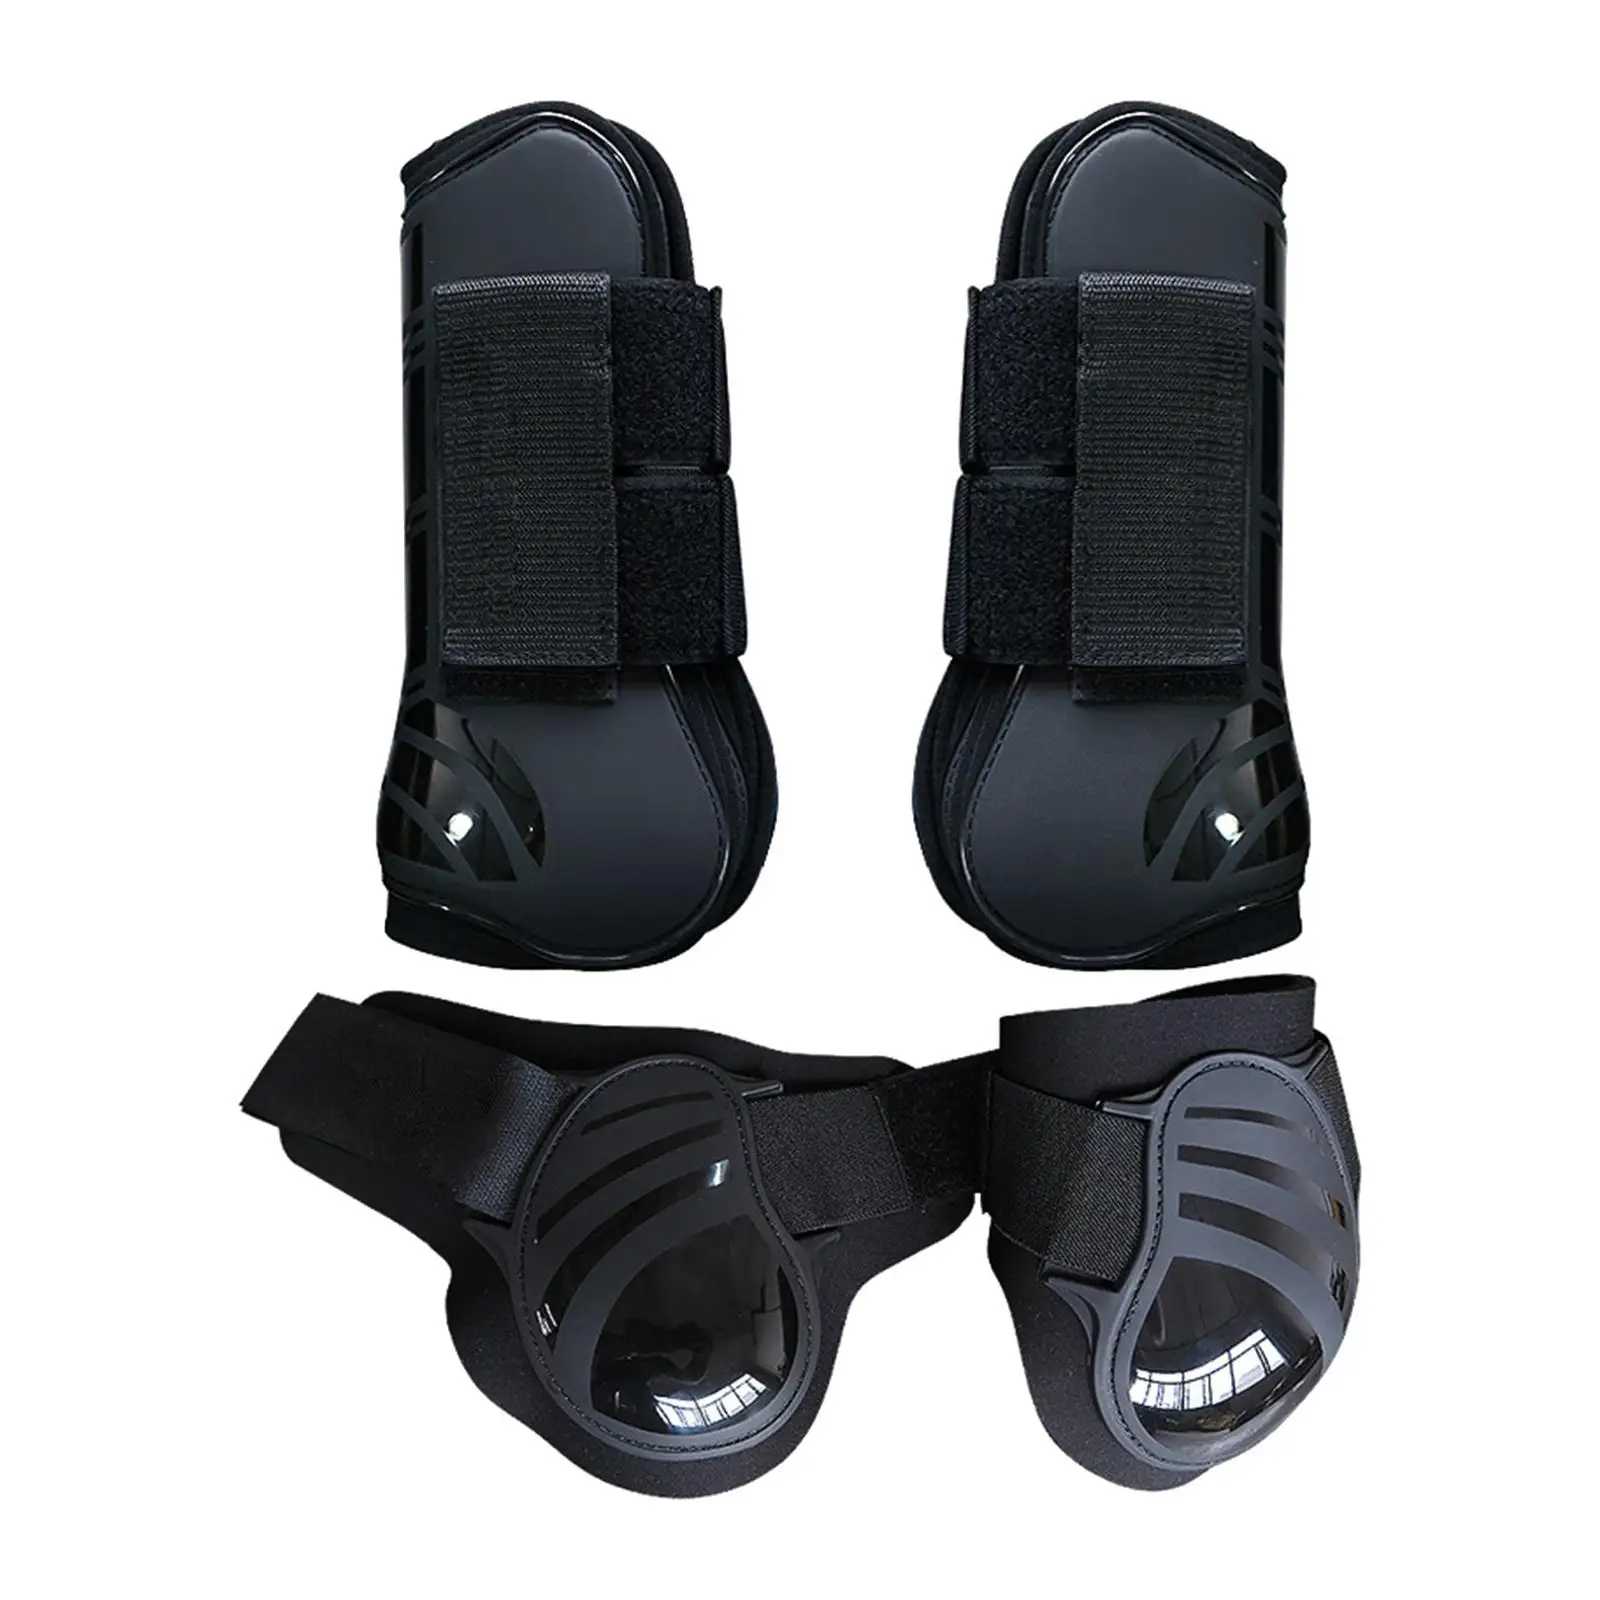 2 Pairs Horse Front Hind Boots, Breathable and Impact-Absorbing Horse